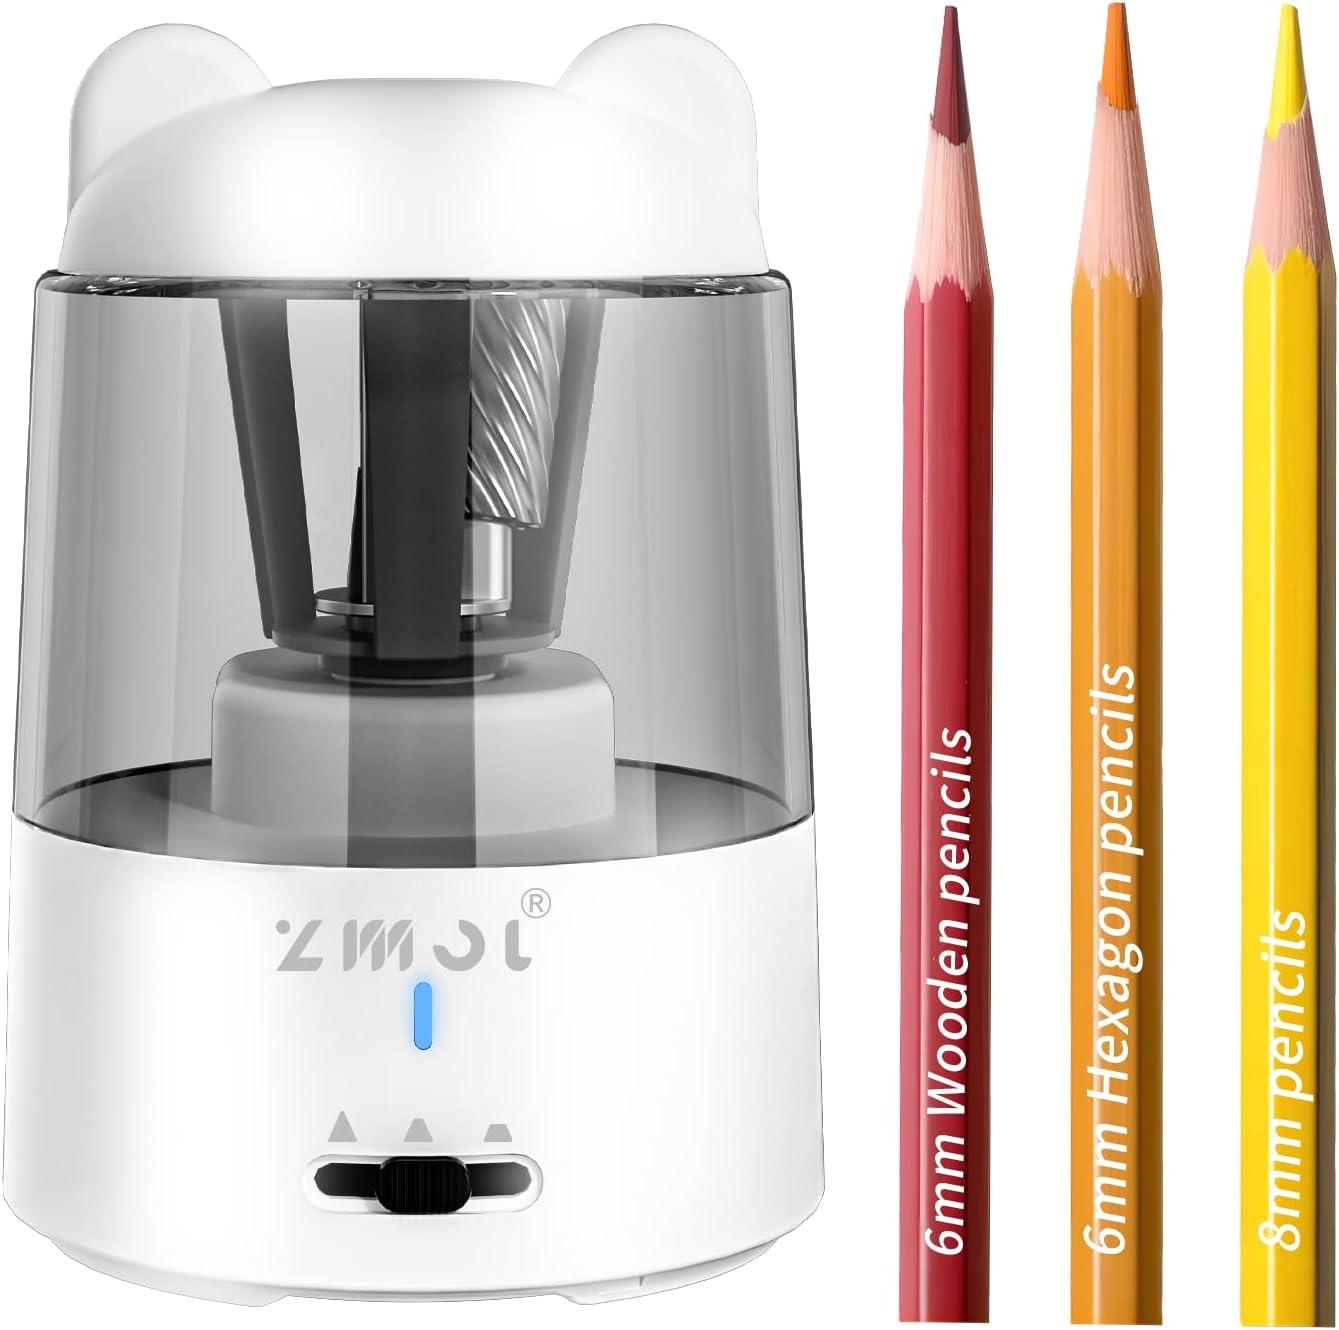 zmol battery powered electric pencil sharpener small battery operated pencil sharpeners fast sharpen suitable